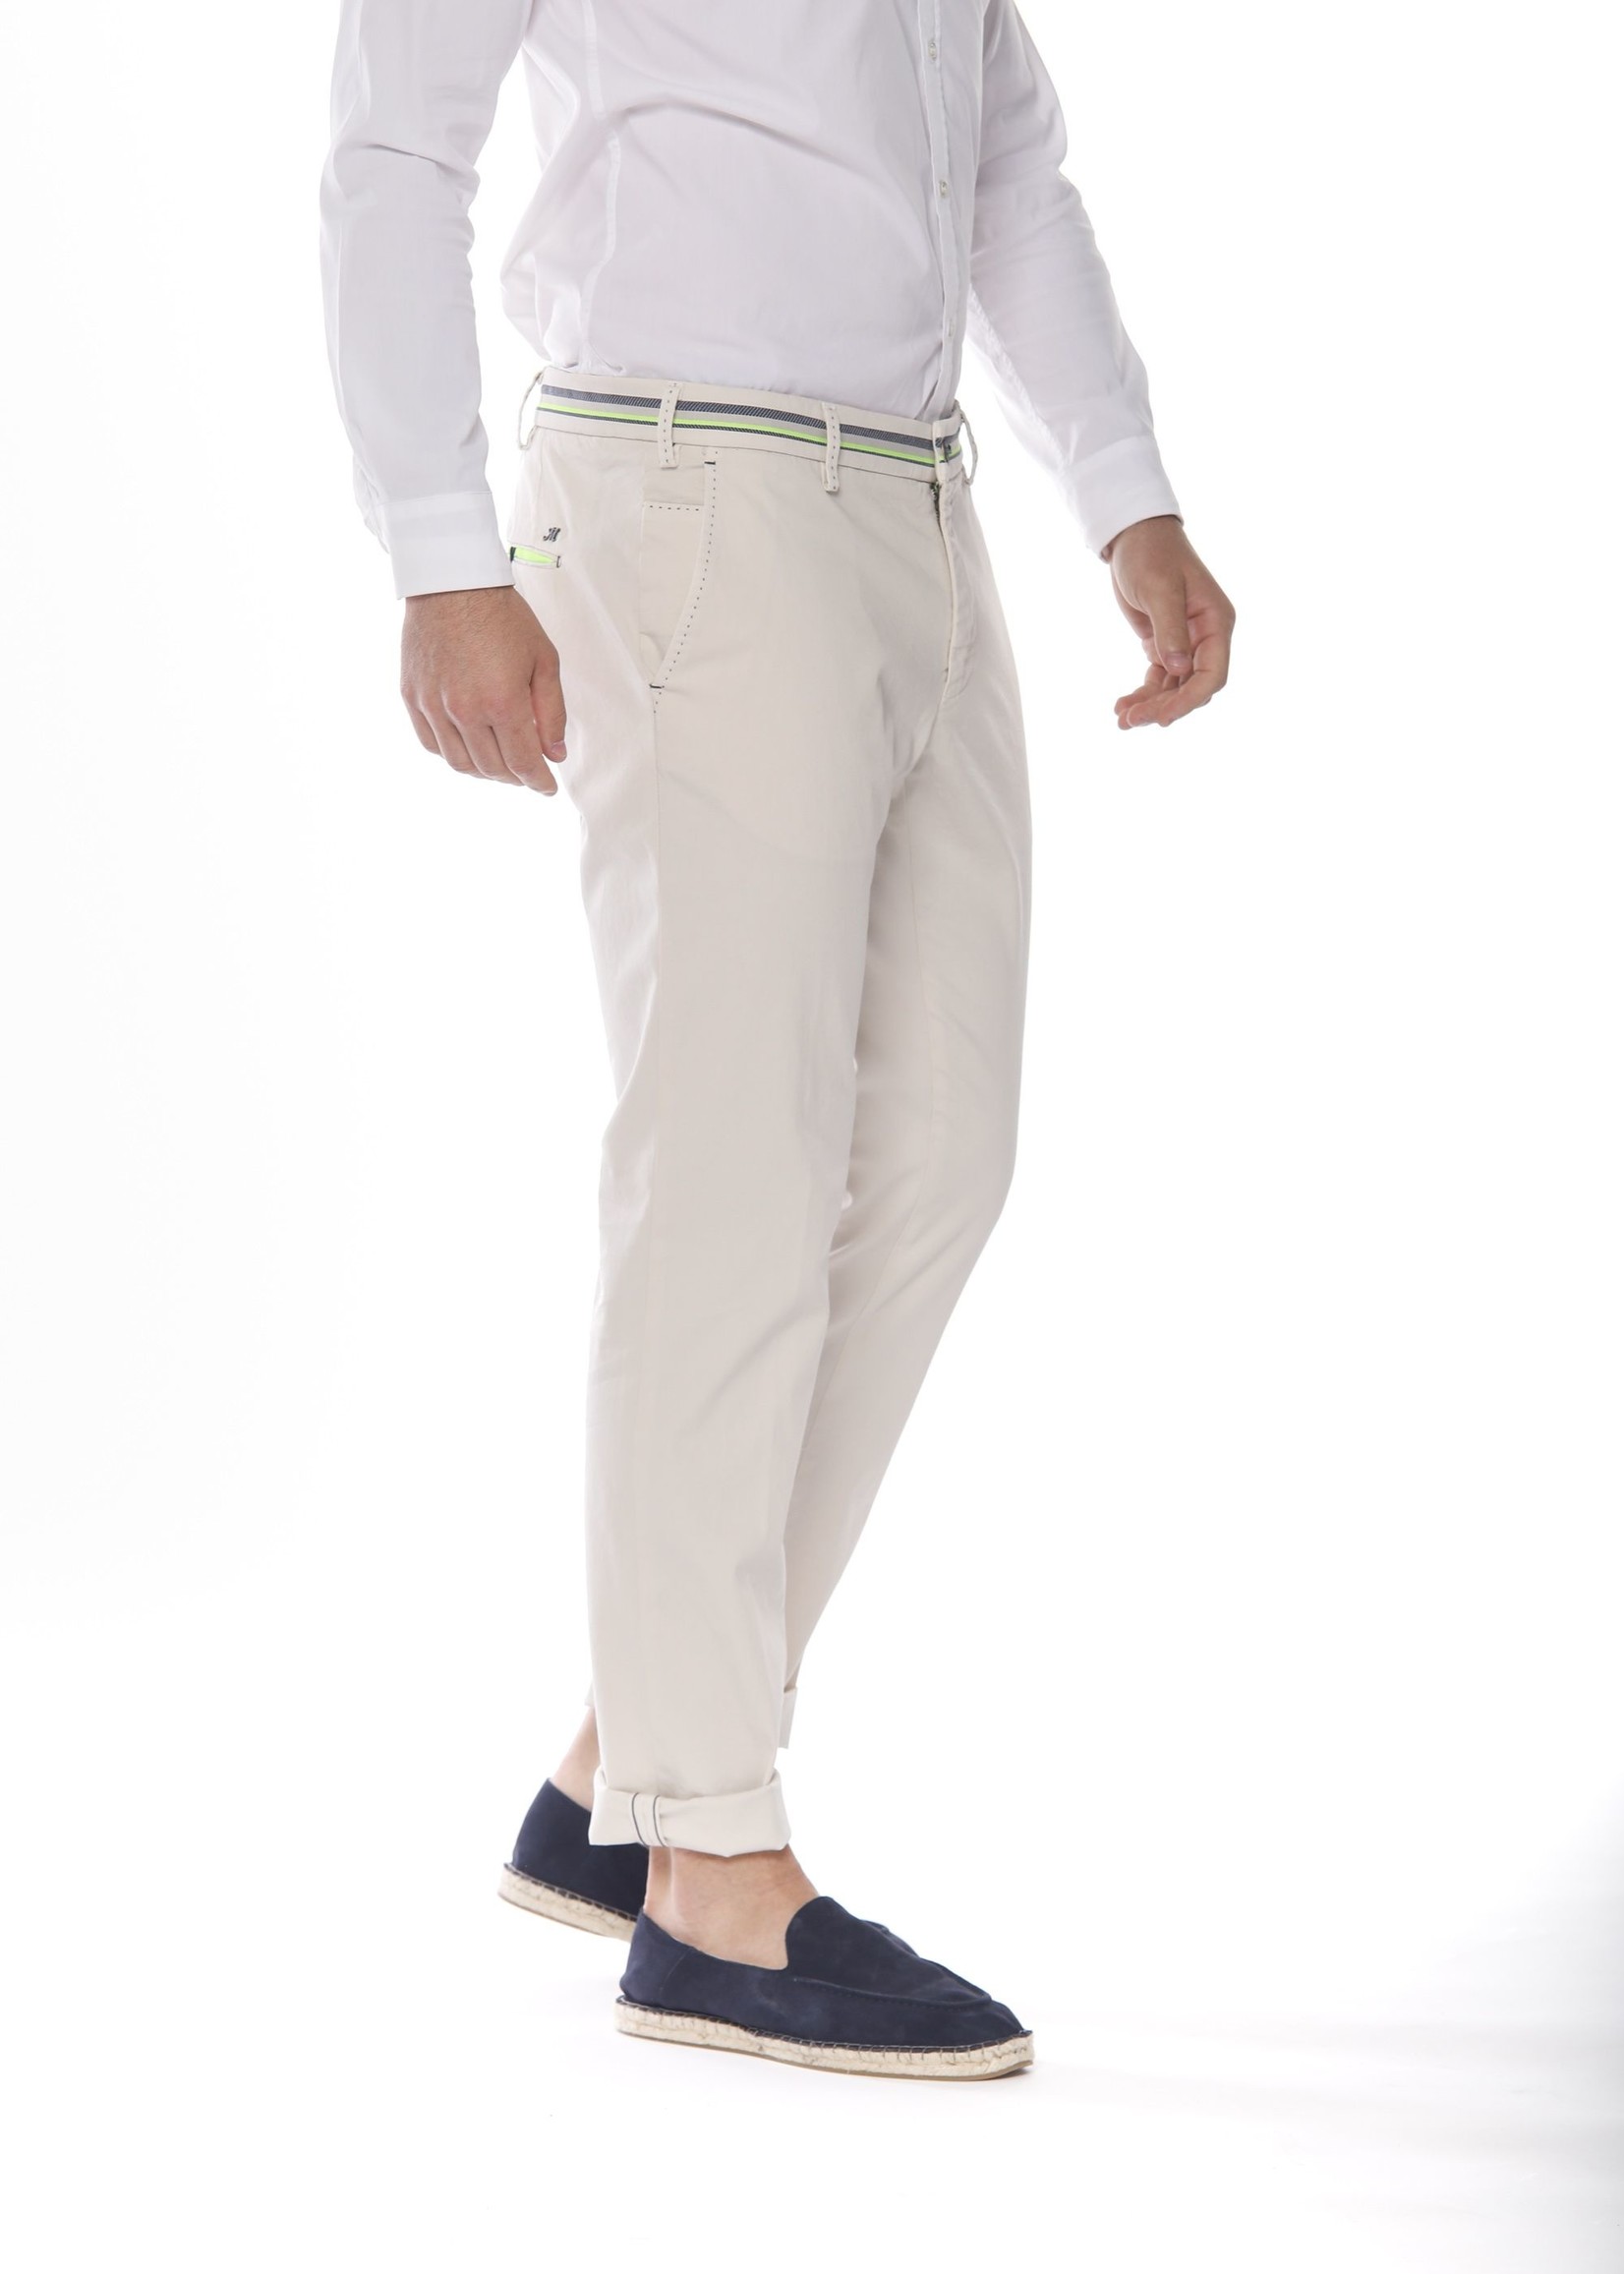 Brooks Brothers Milano fit Supima cotton chinos for $40.50 with ShopRunner  discount : r/frugalmalefashion